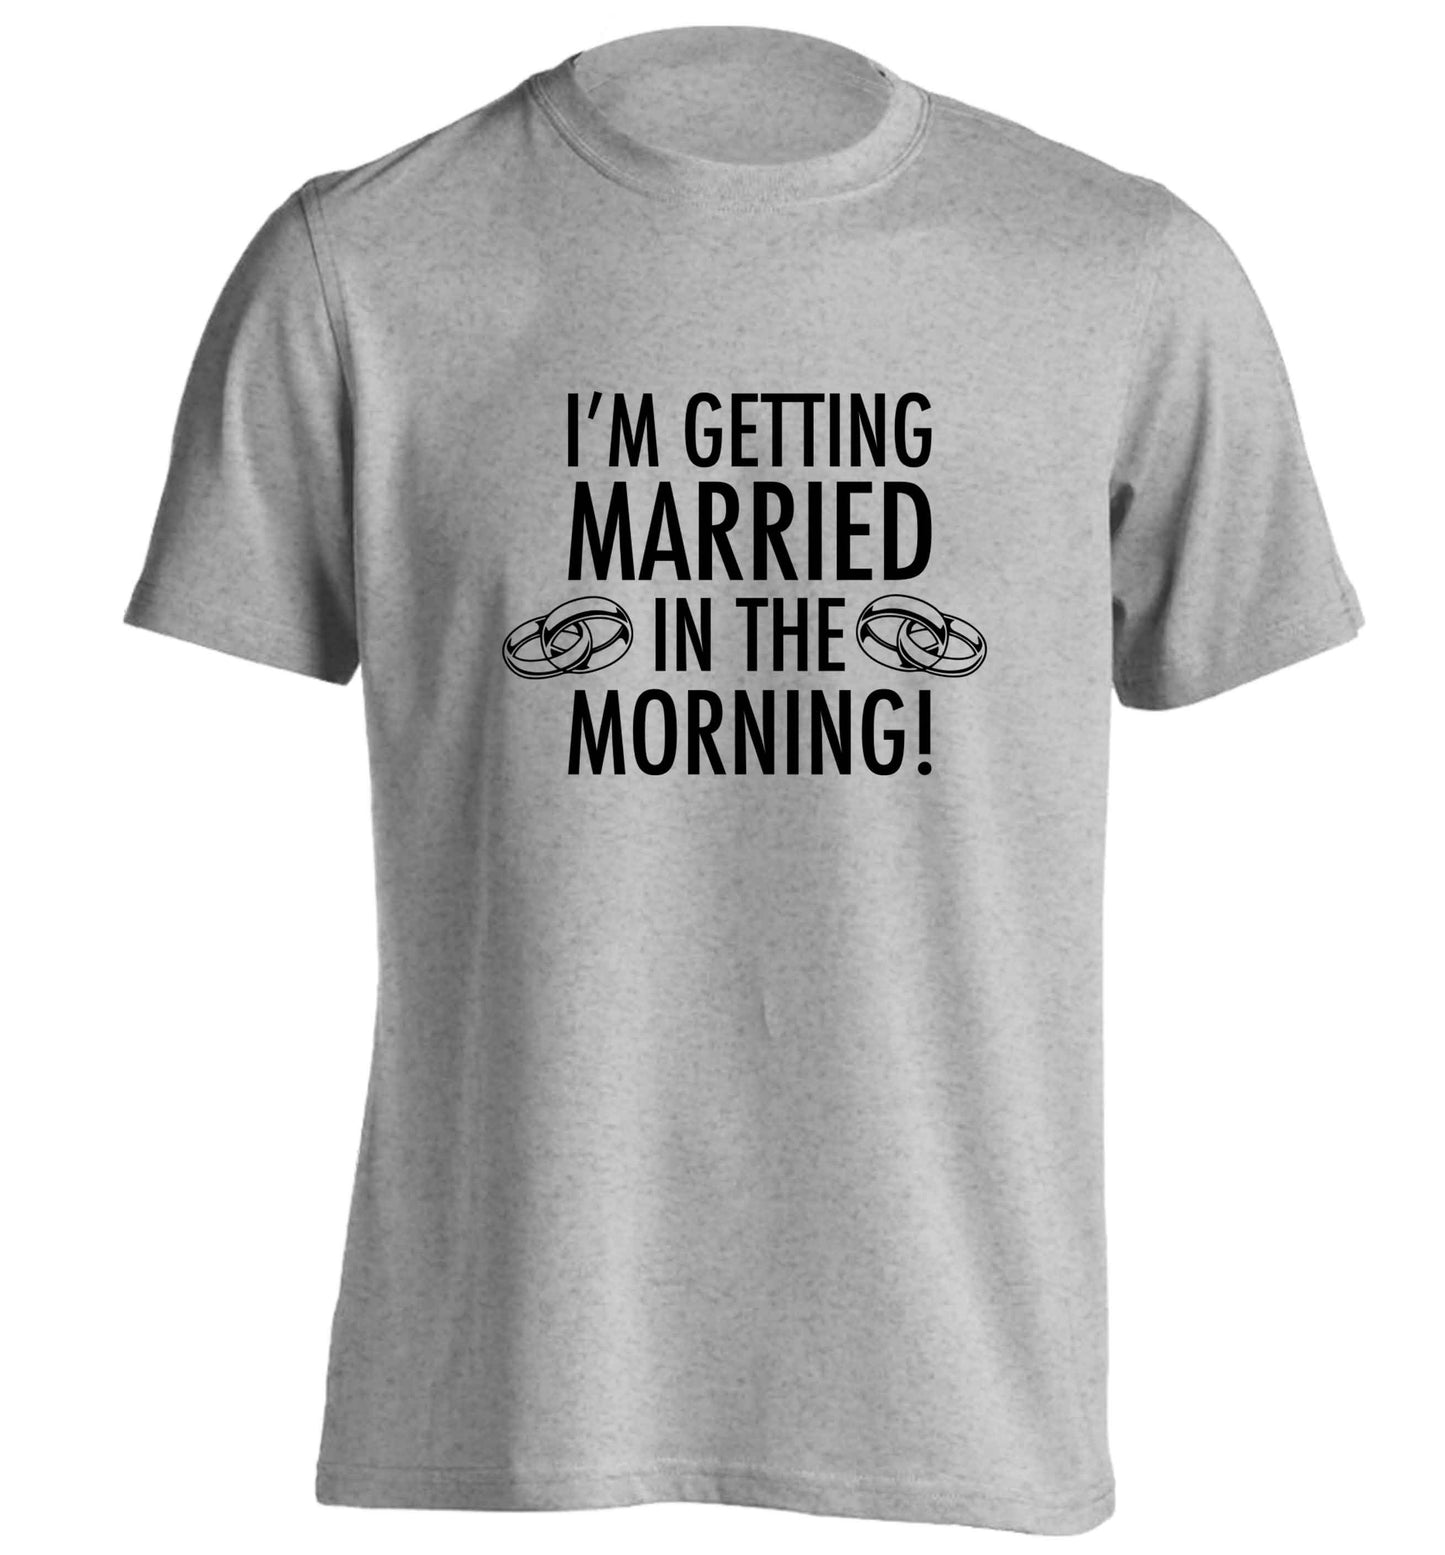 I'm getting married in the morning! adults unisex grey Tshirt 2XL